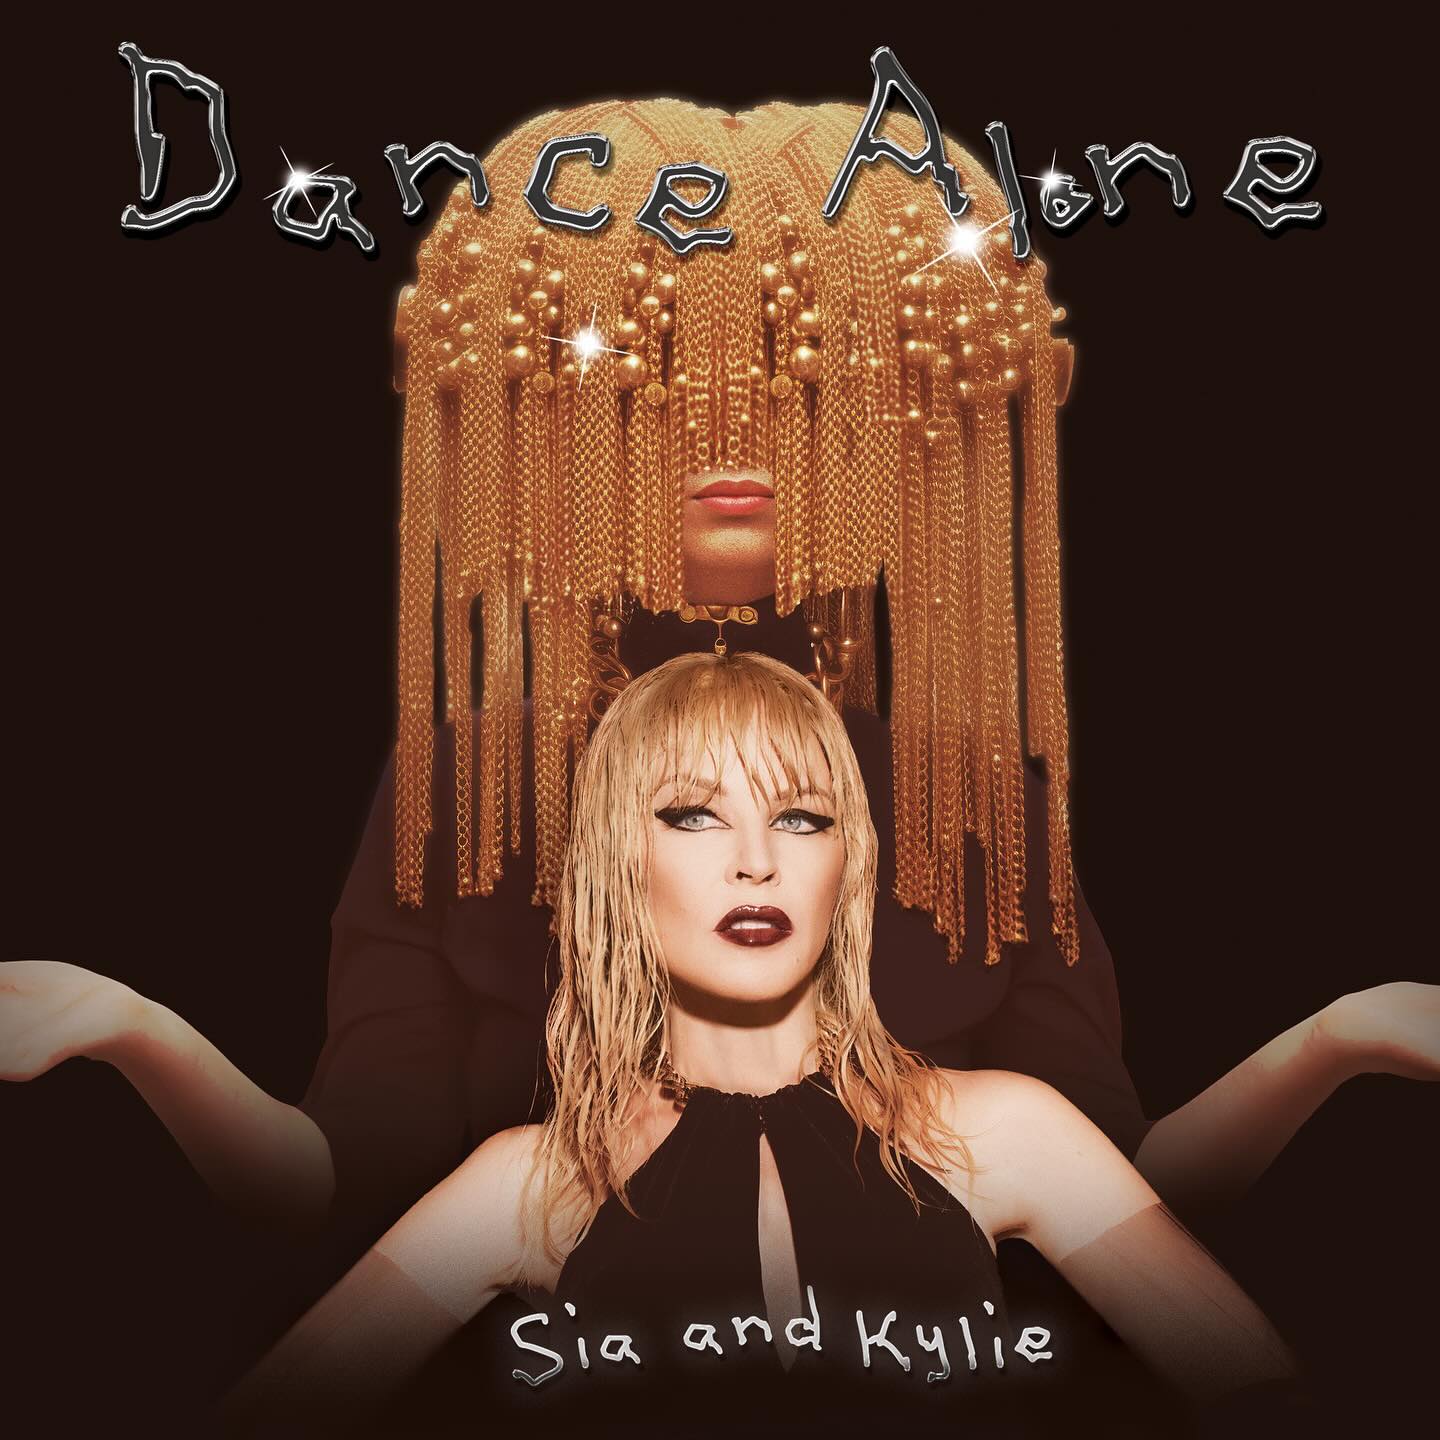 On a black background, Sia's face is obscured by draped pearls in the shape of her oversized wigs, with Kylie underneath.